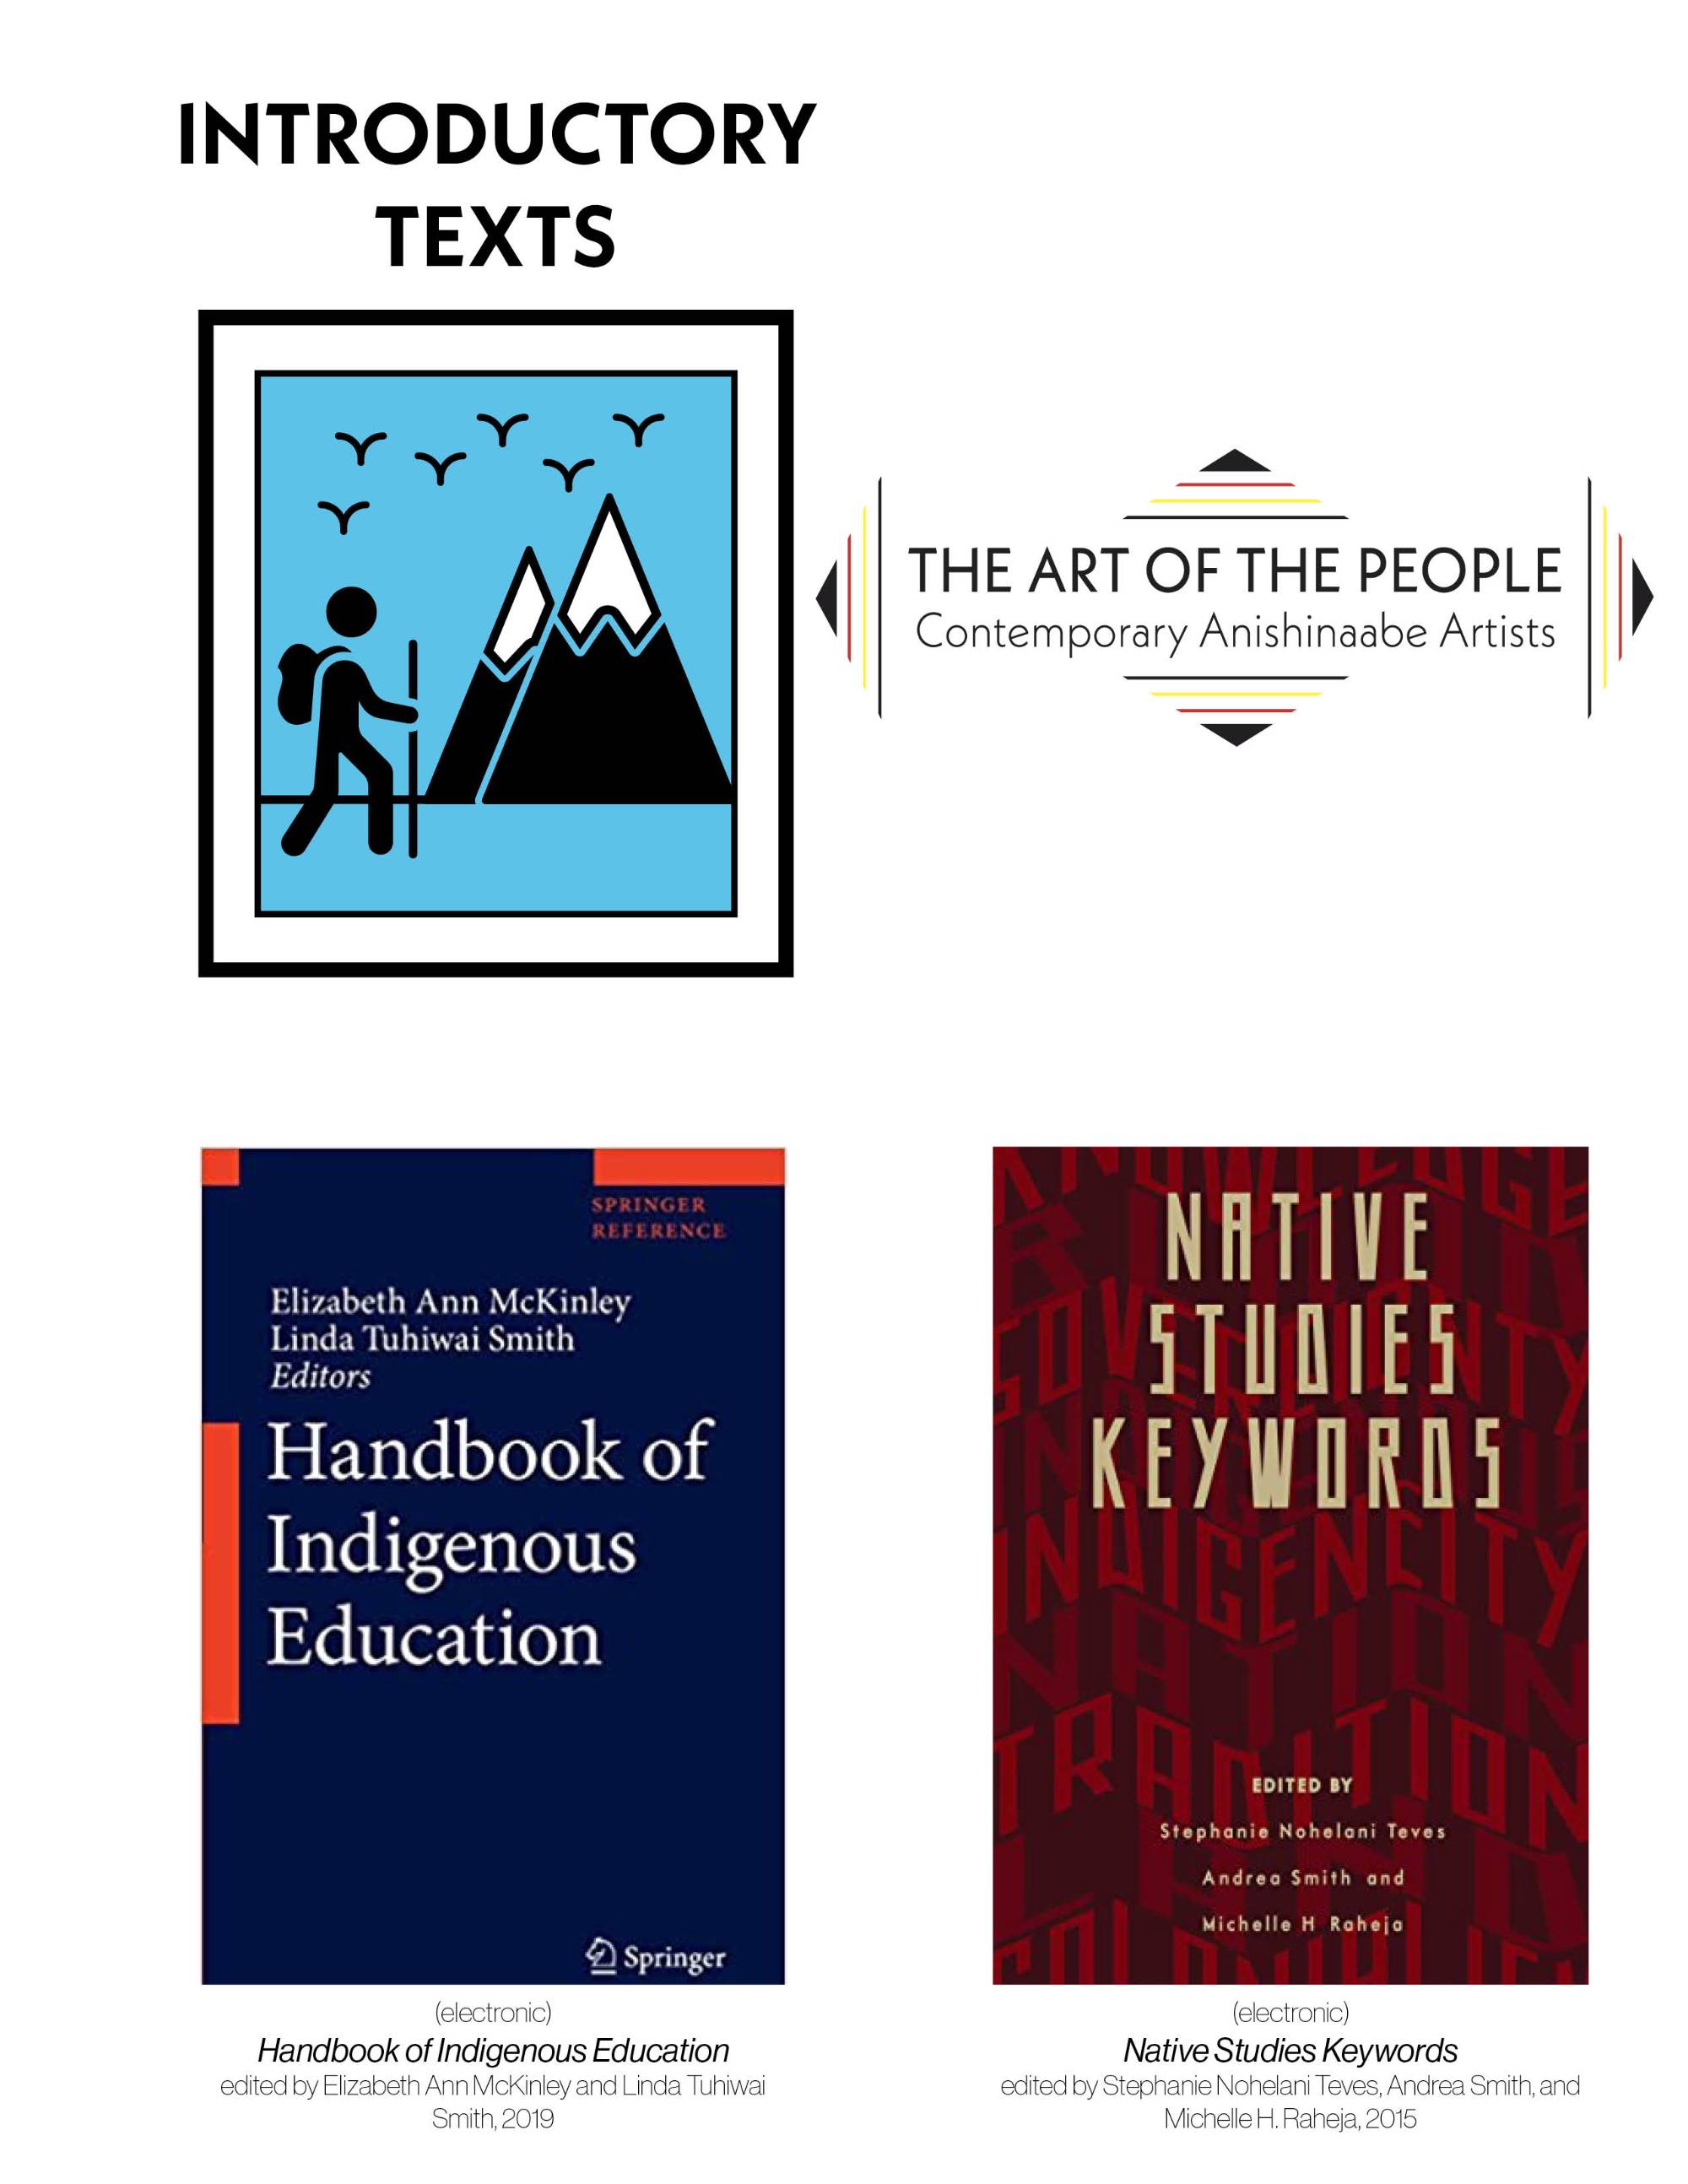 Art of the People Reading List